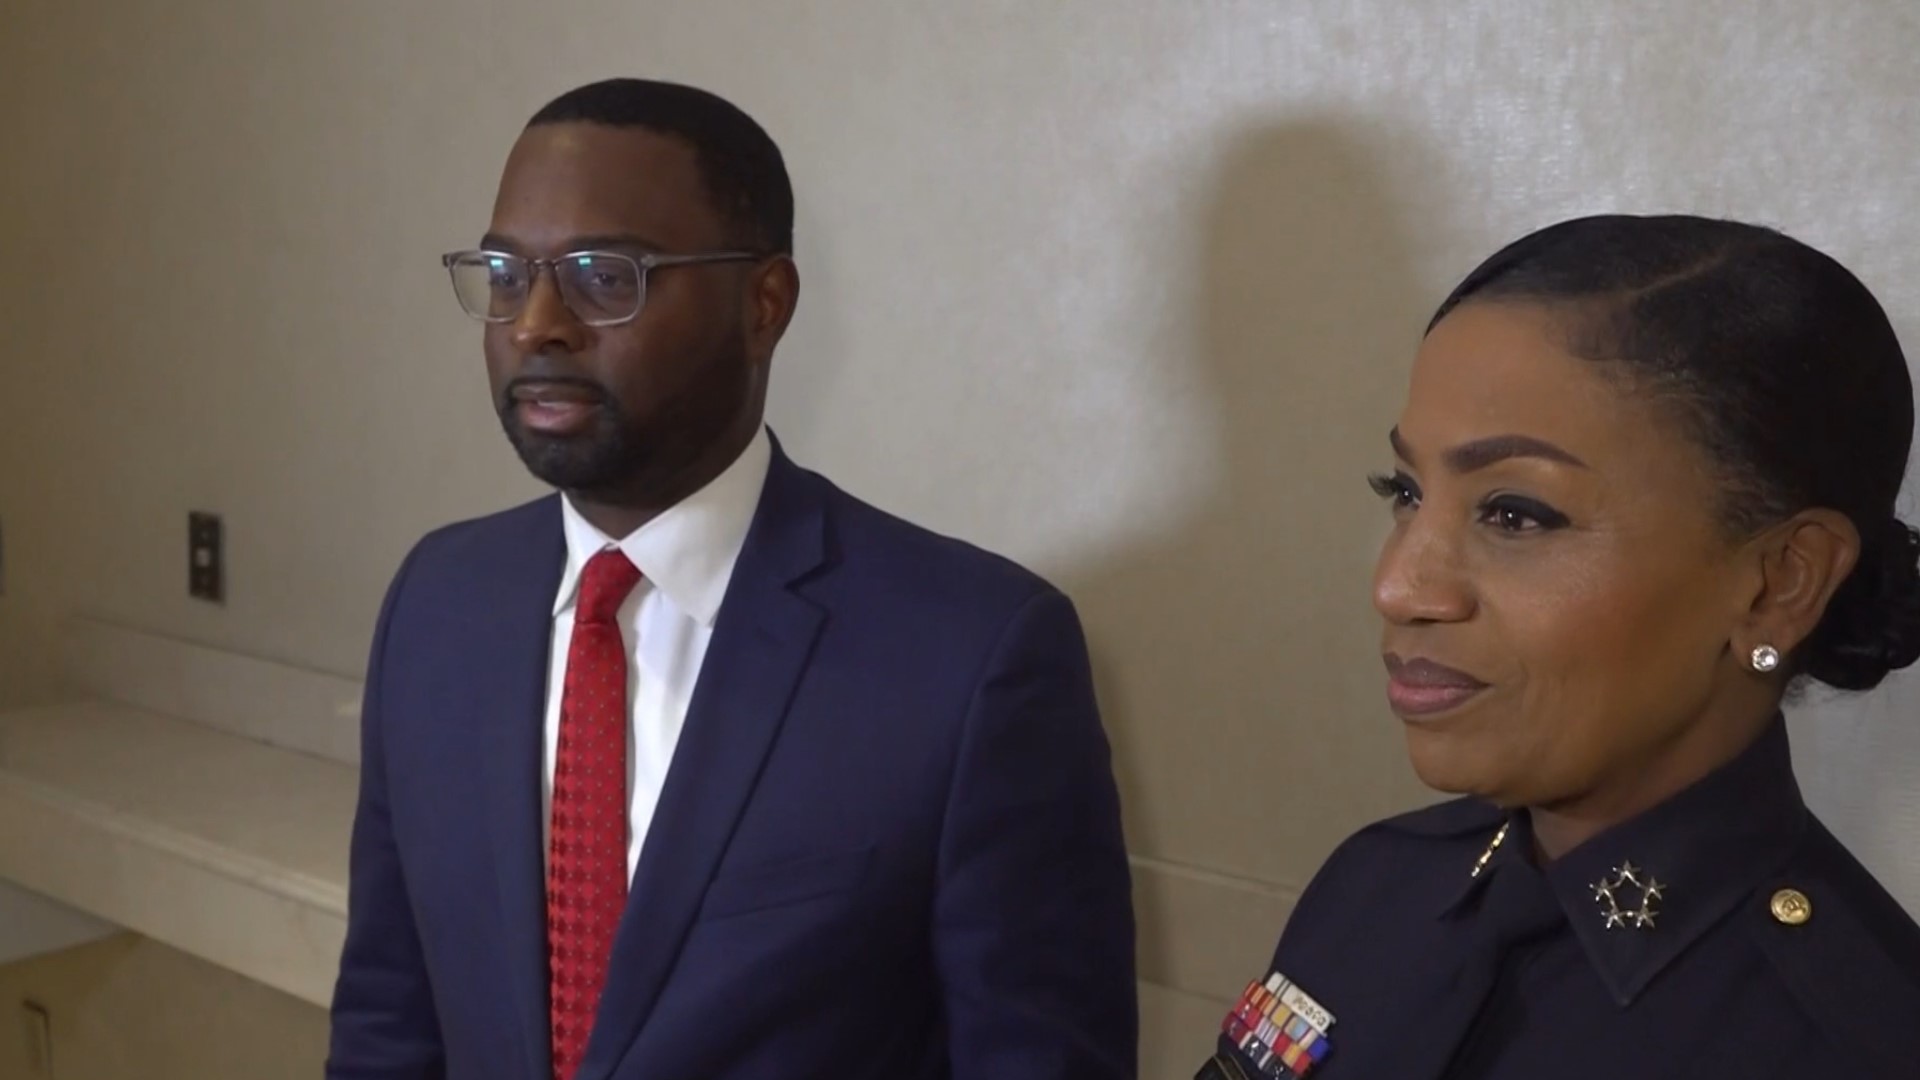 Paul Young revealed to ABC24 first that he will keep CJ Davis onboard as police chief. Young and Davis spoke in exclusive interviews with anchor Richard Ransom.